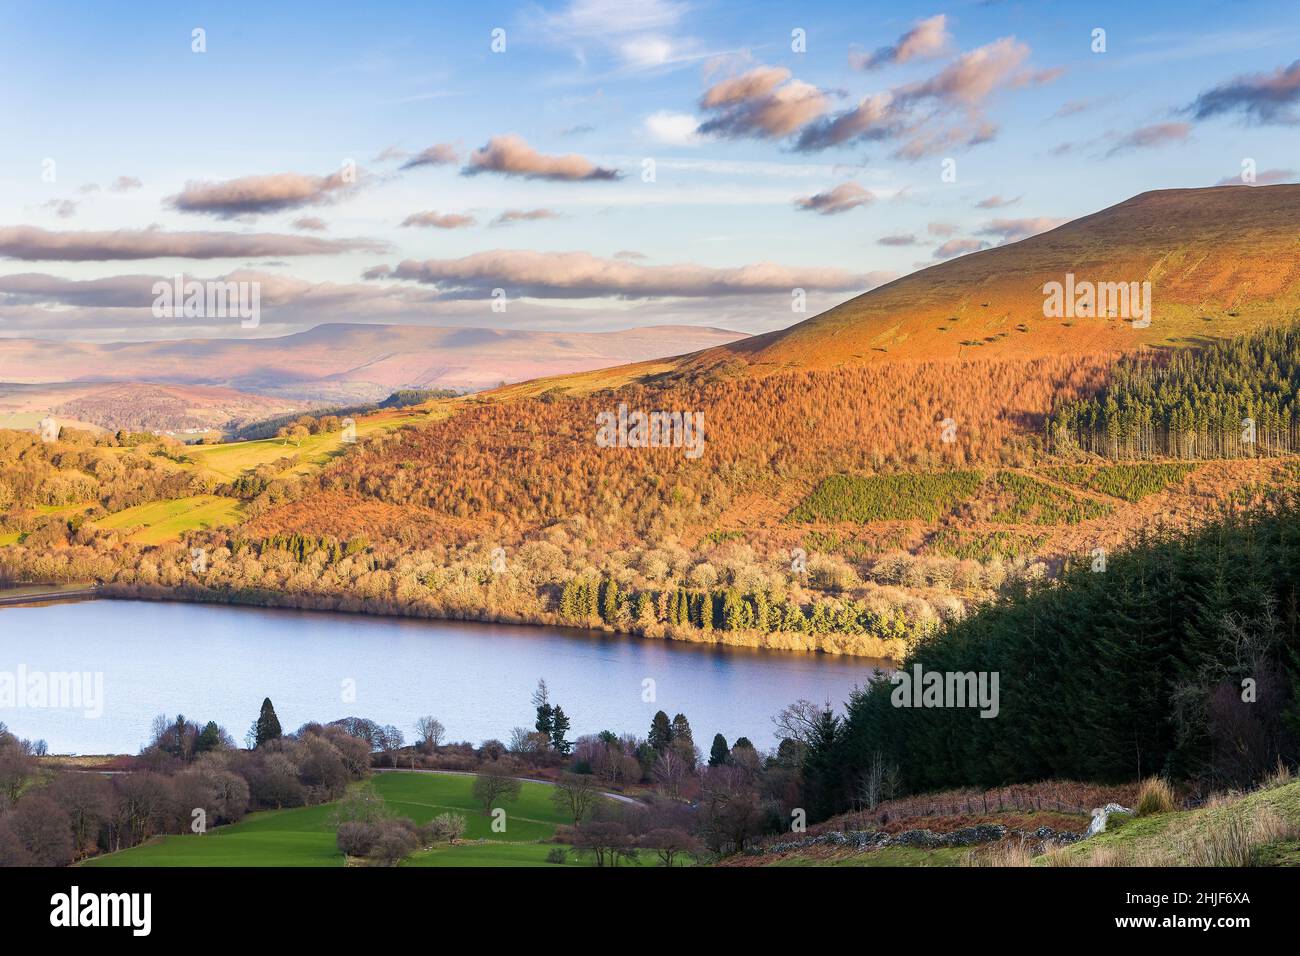 Beautiful rural farmland and hills in Talybont, Brecon Beacons, Wales, UK Stock Photo